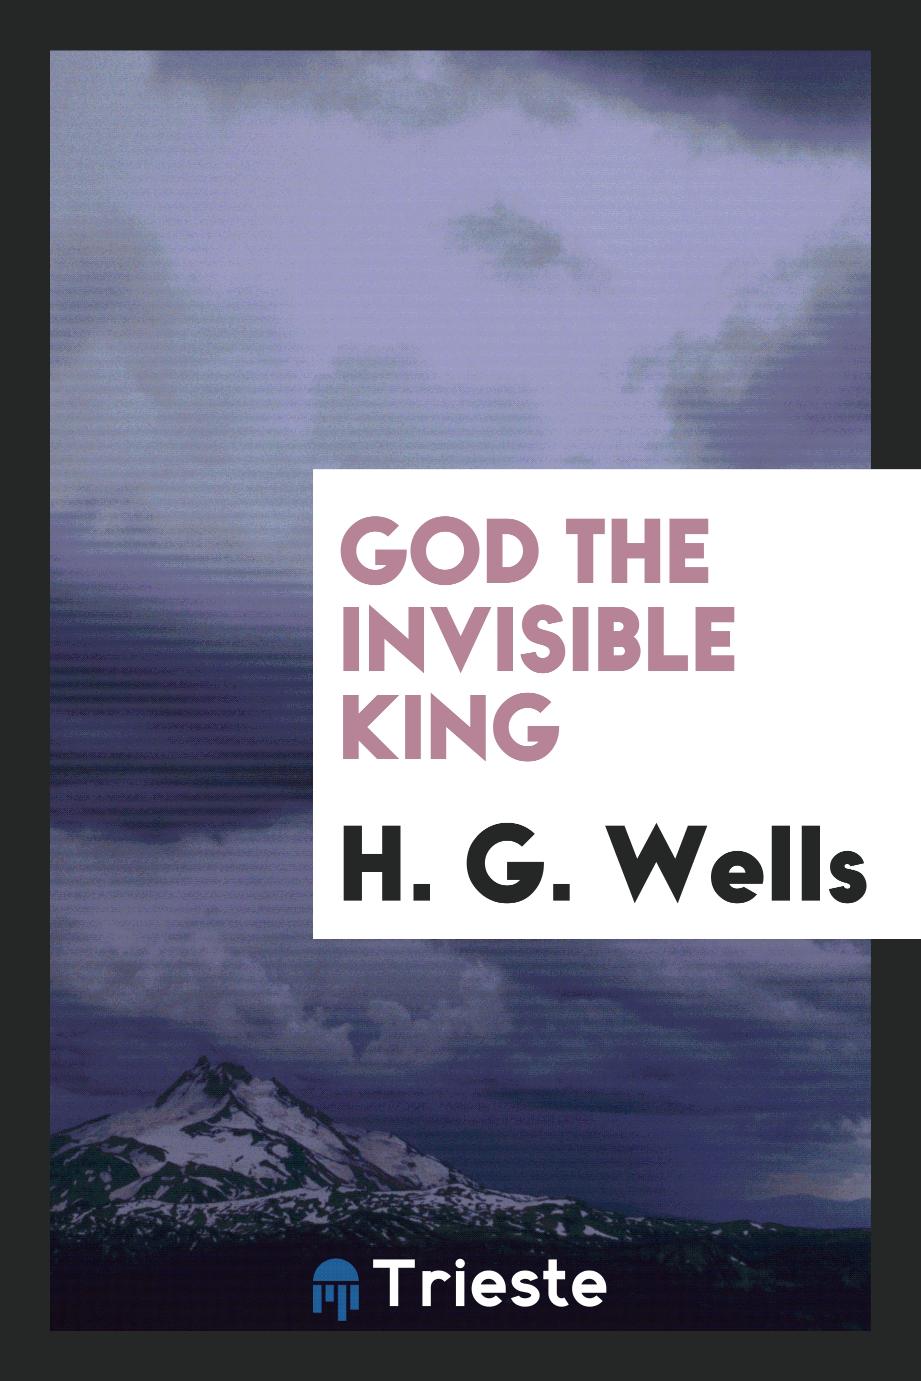 God the invisible king